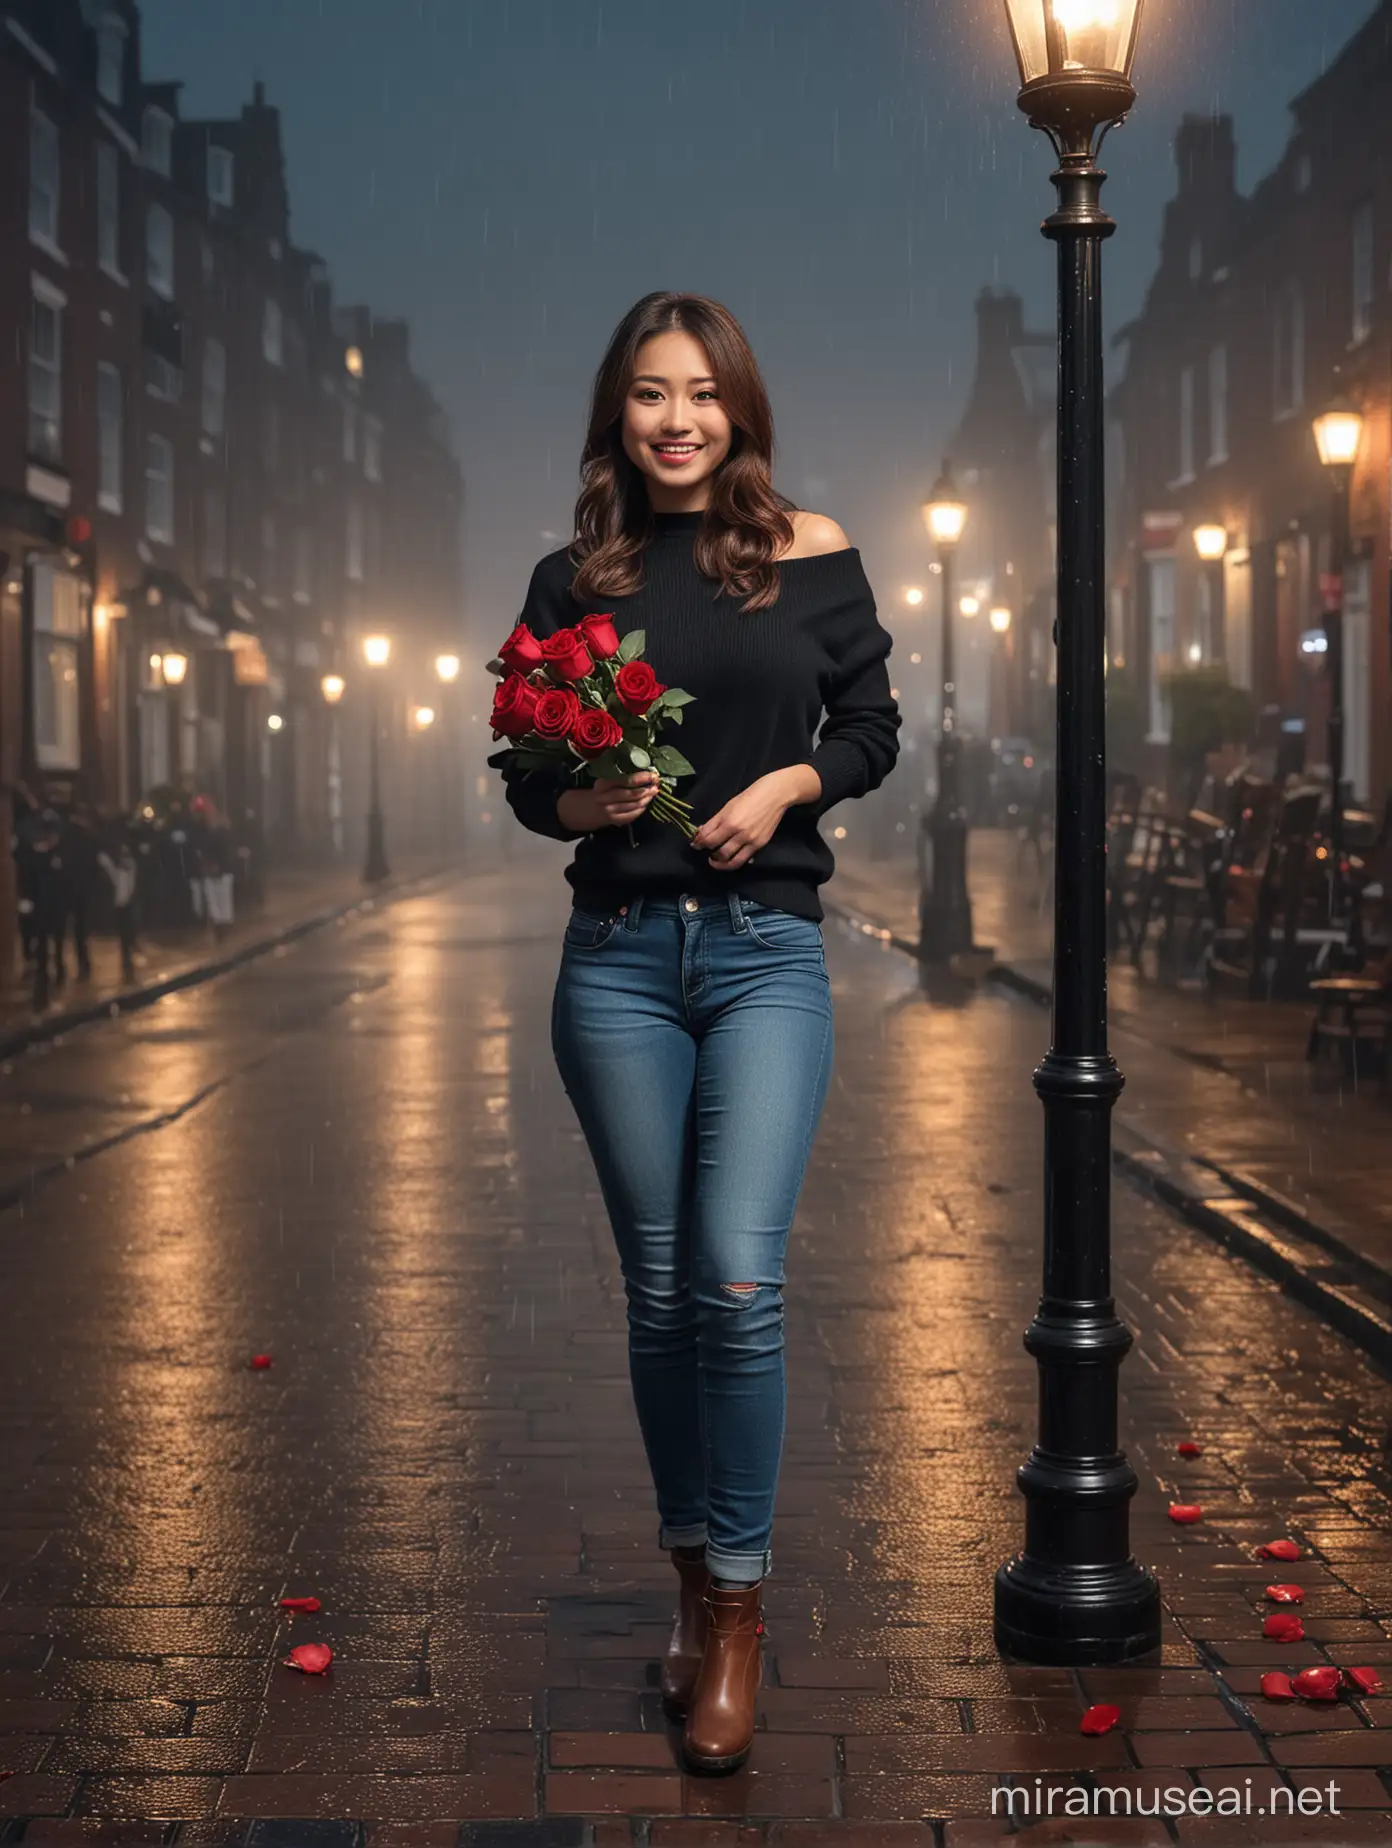 asian womans 35 year old, hair brown, use a black sweater, use phant blue jeans, use shoe boot brown, hold red rose , dynamic pose, smile face
background, england city at night, rain, foggy, cinematic, lamp a town